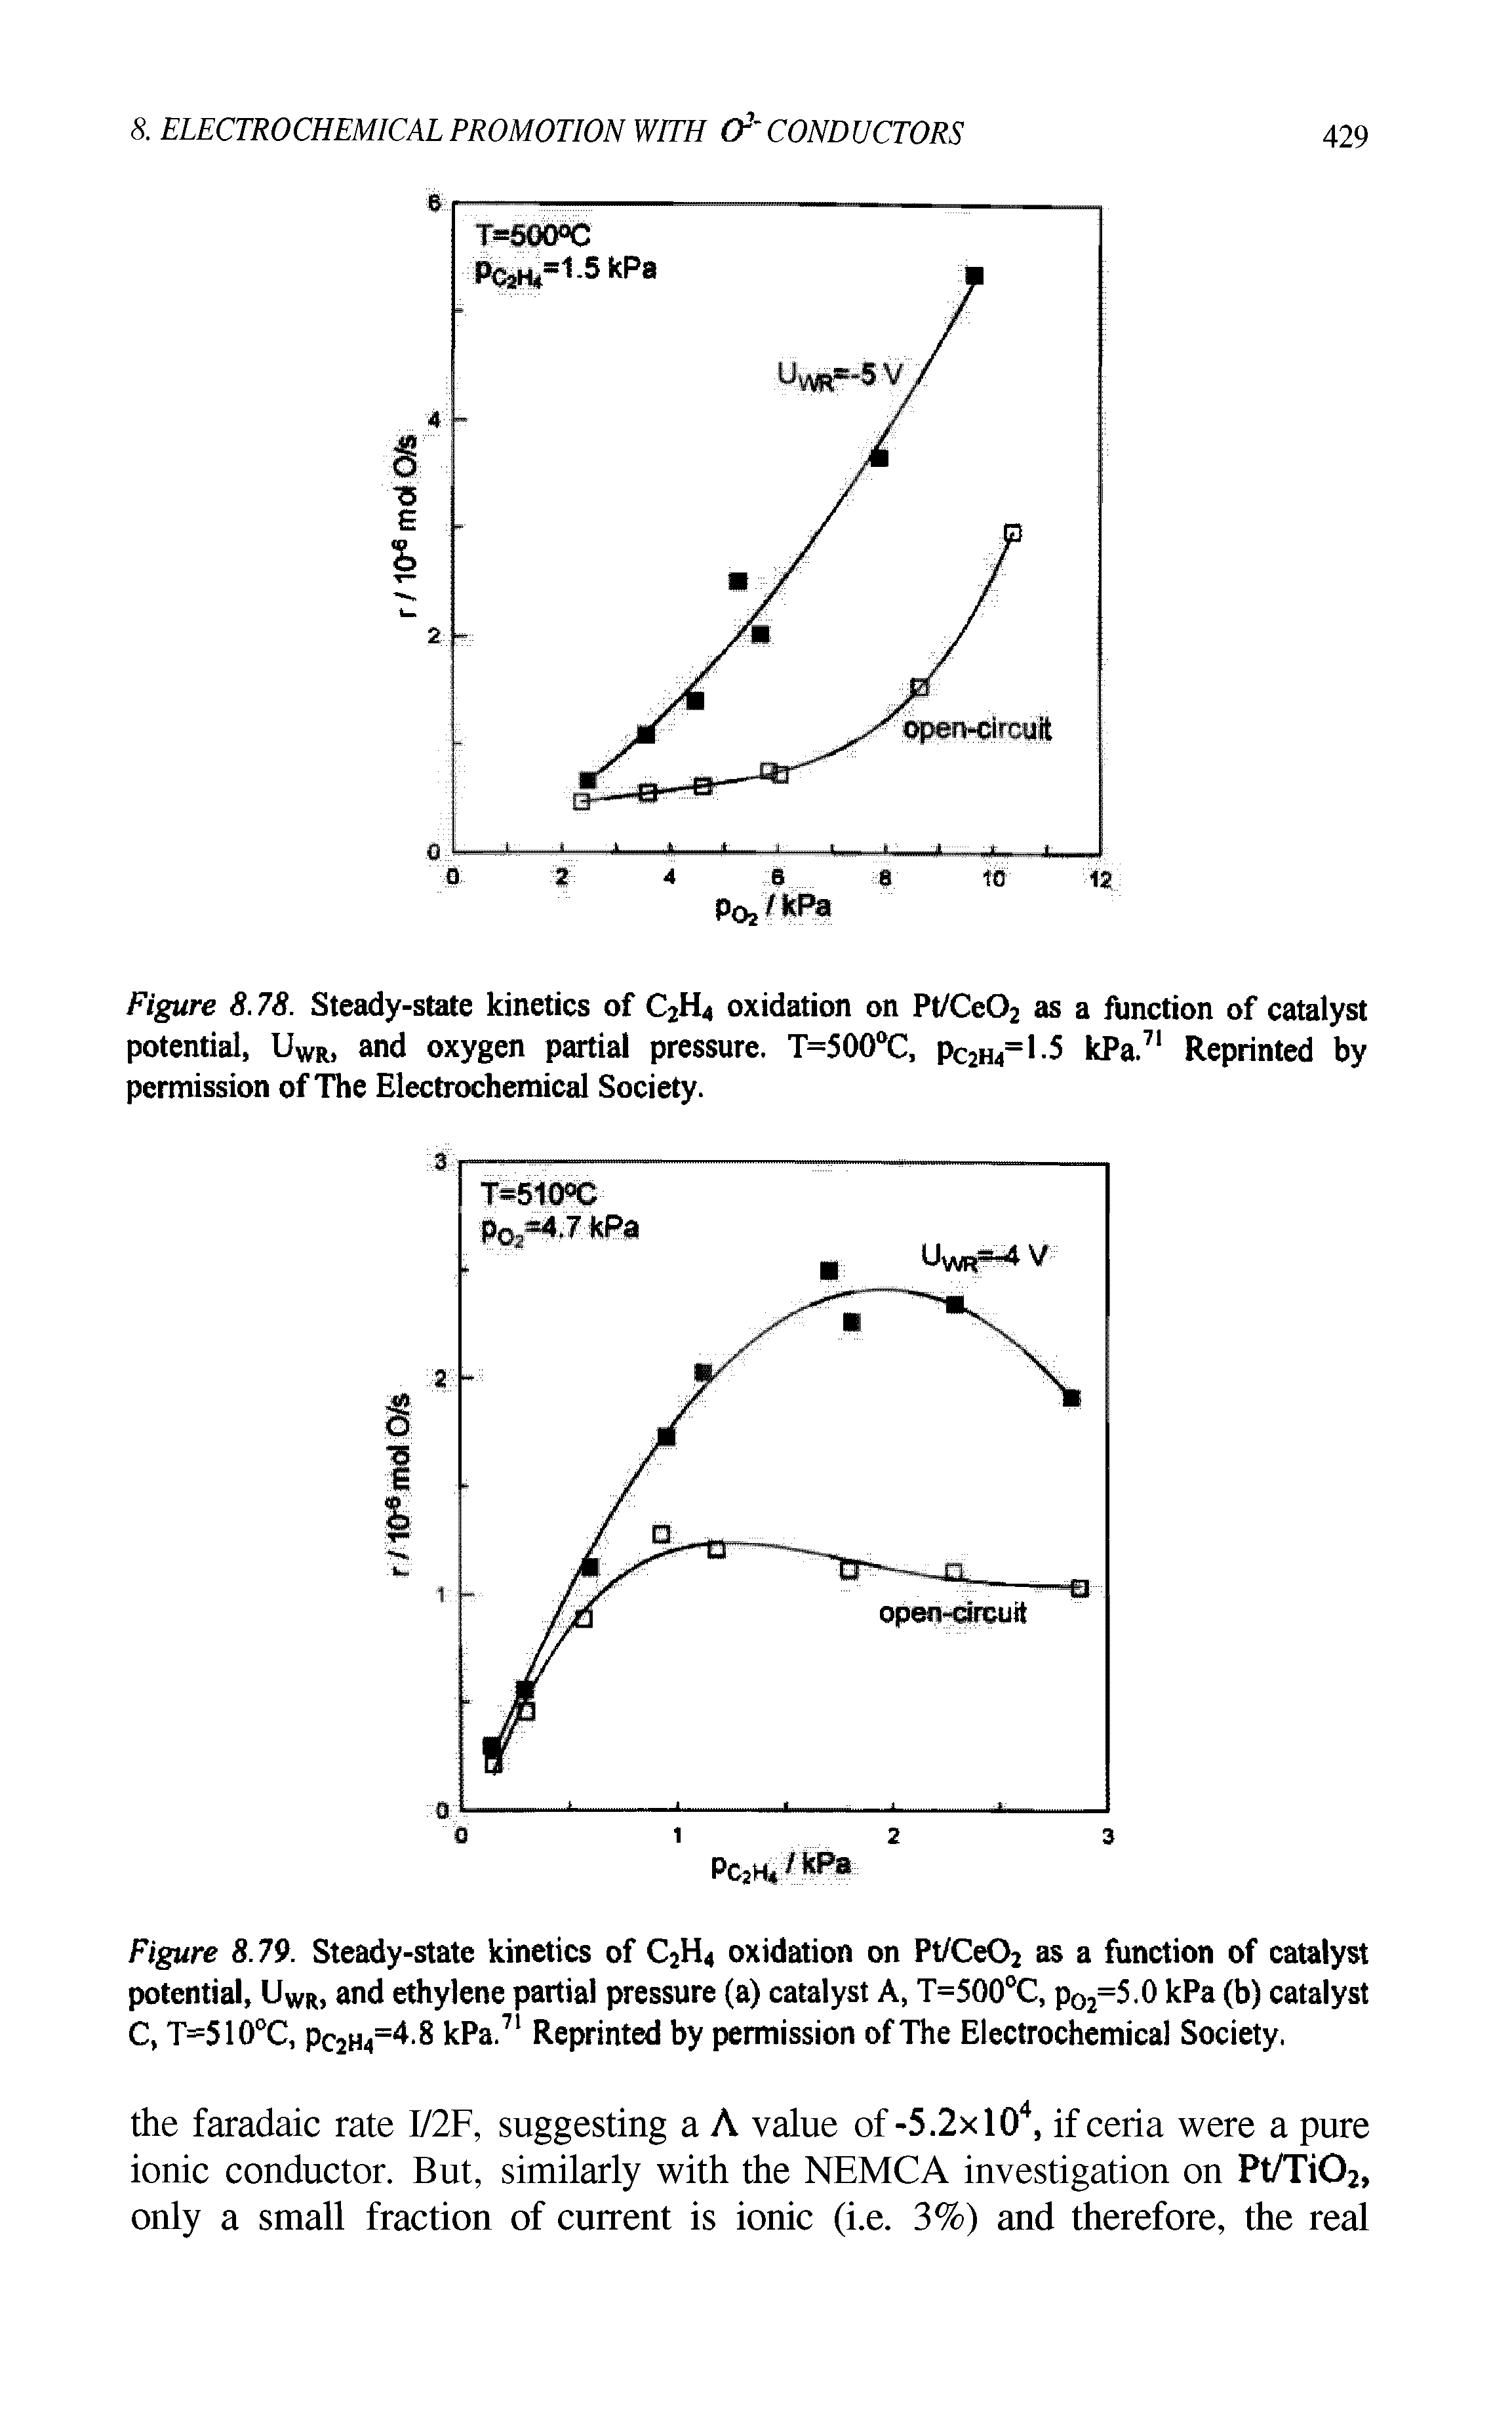 Figure 8.78. Steady-state kinetics of C2H4 oxidation on Pt/Ce02 as a function of catalyst potential, UWR, and oxygen partial pressure. T=500°C, Pc2h4=1-5 kPa.71 Reprinted by permission of The Electrochemical Society.